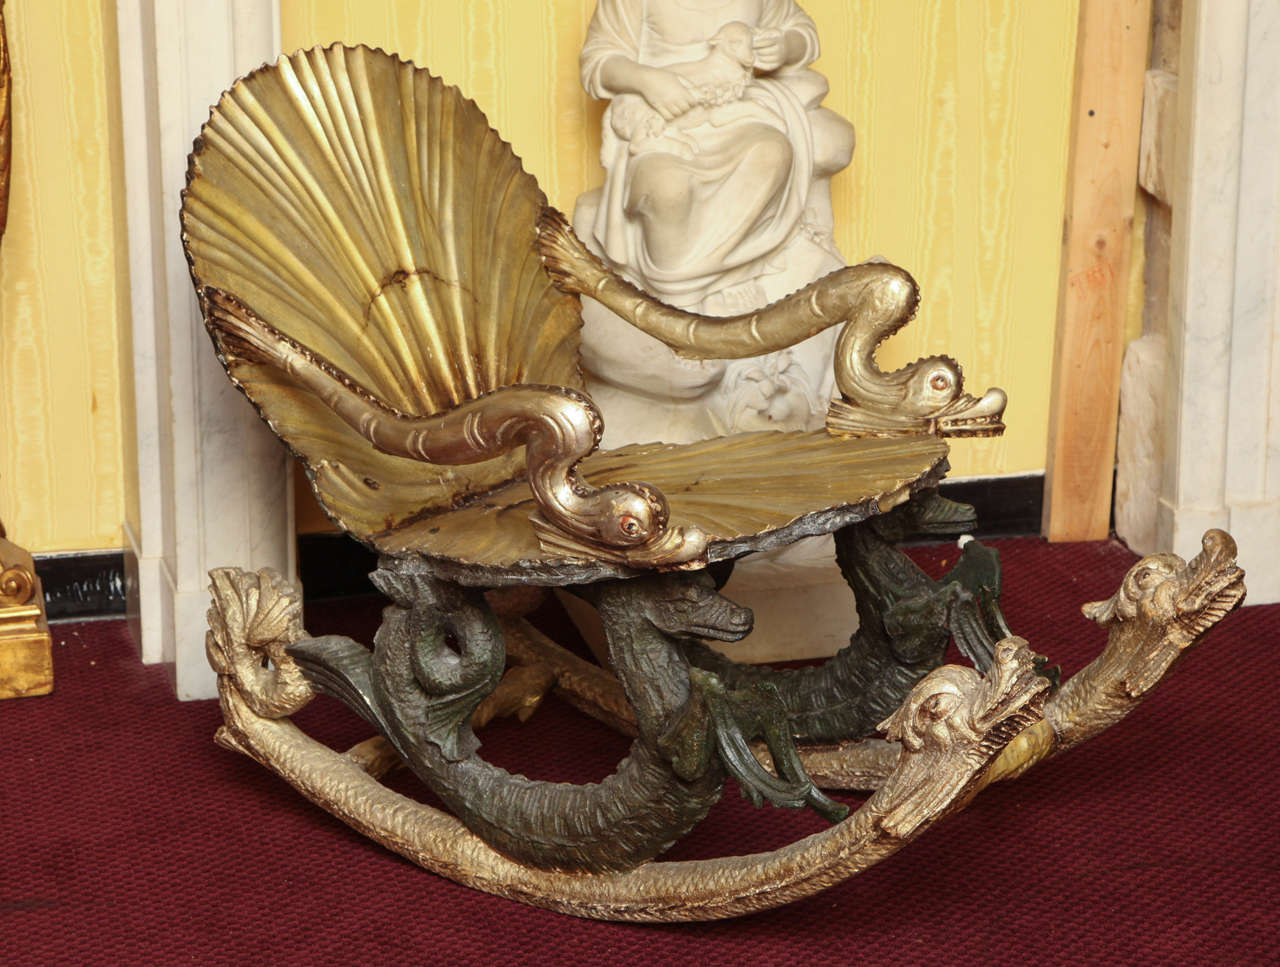 A fine Venetian Grotto silvered rocking chair with animal figures with seashell motif.